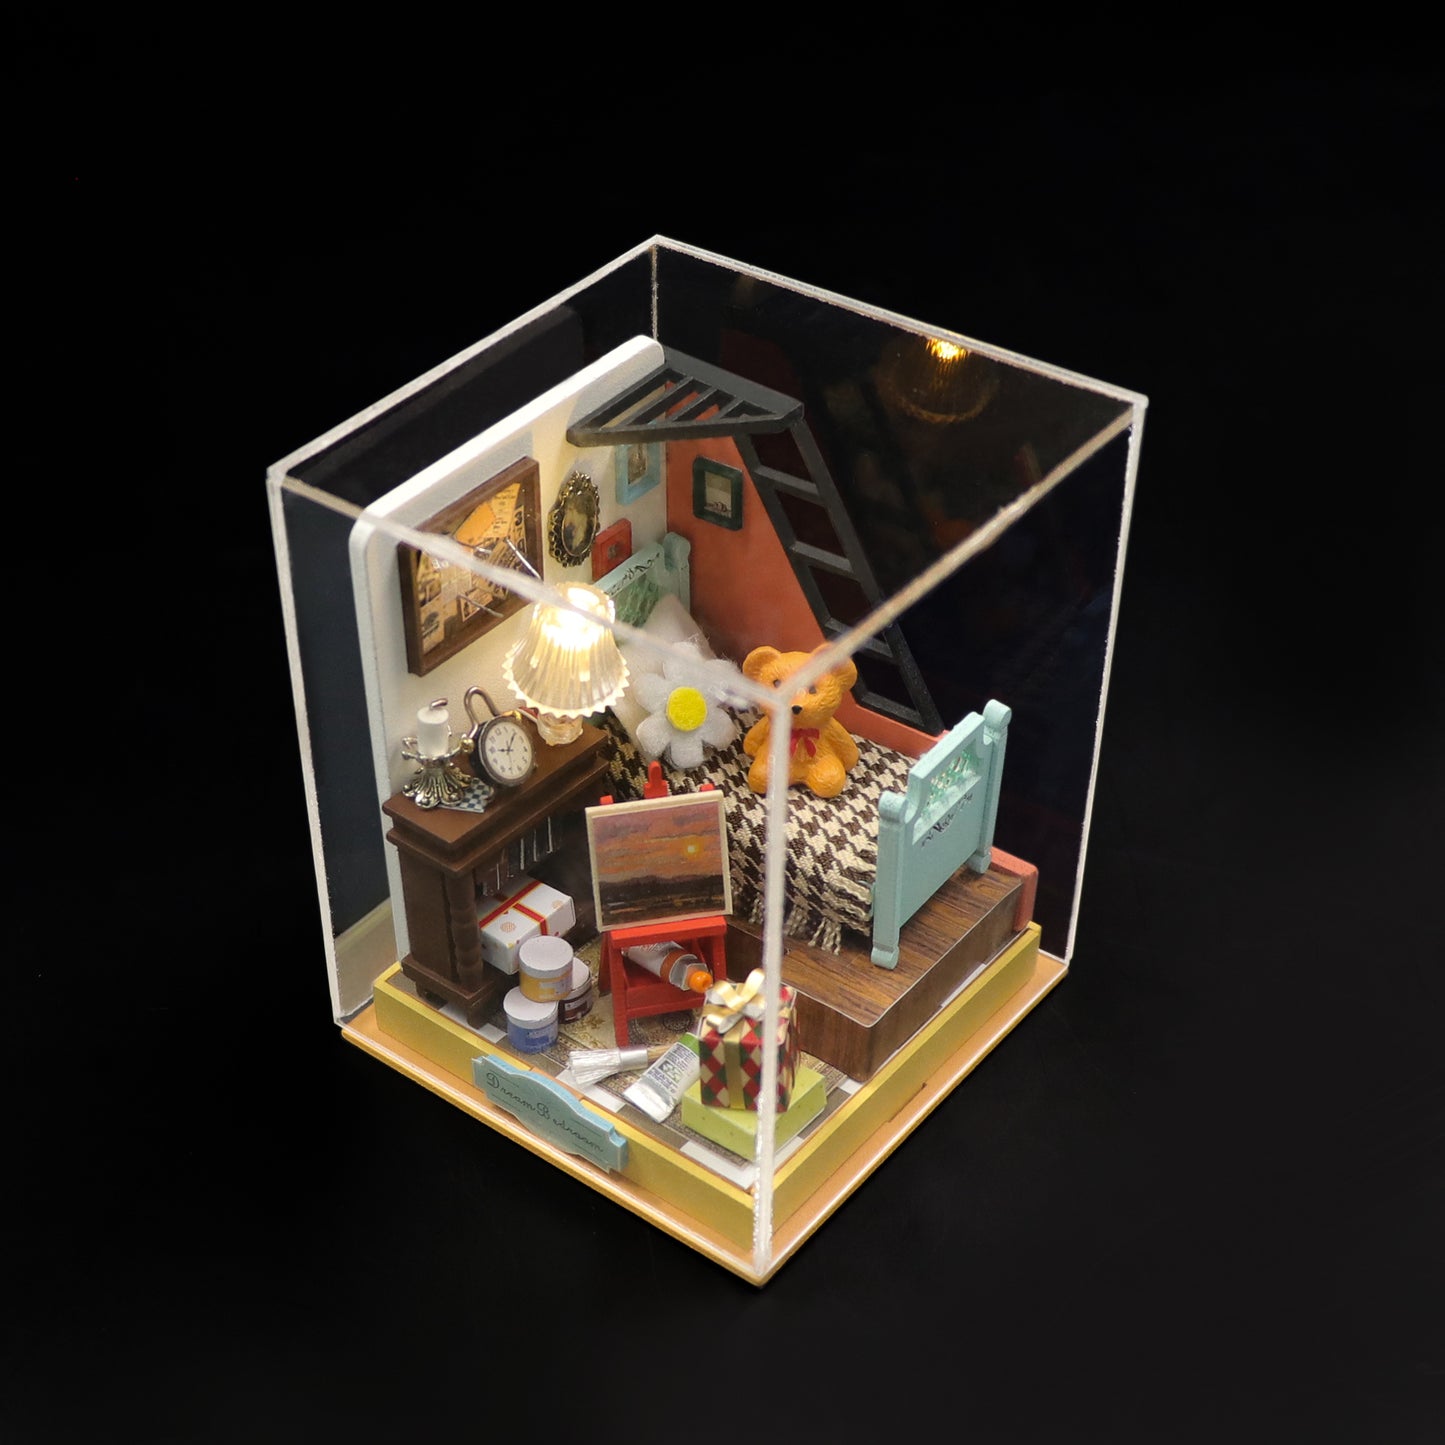 DIY "Dream Bedroom" S2302 Dollhouse Furniture Wooden Miniature Dollhouse w/ LEDs and Dust Proof Cover Toy Kits Fun Crafts